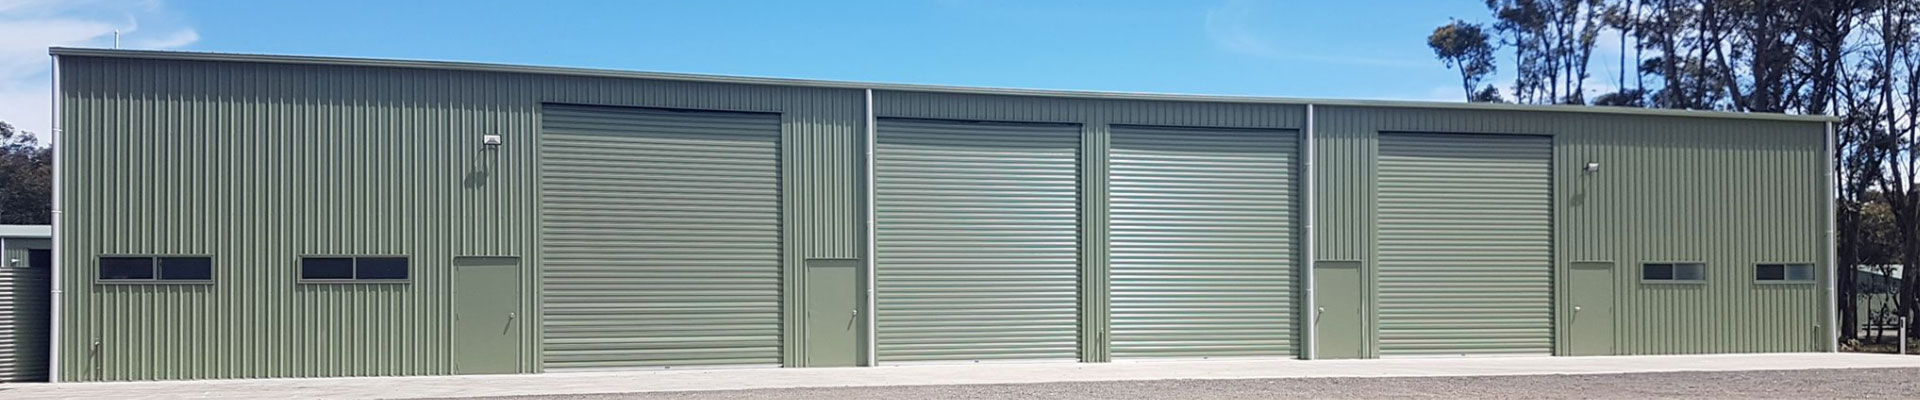 Commercial Sheds Melbourne - Top Quality with Shed Doctor